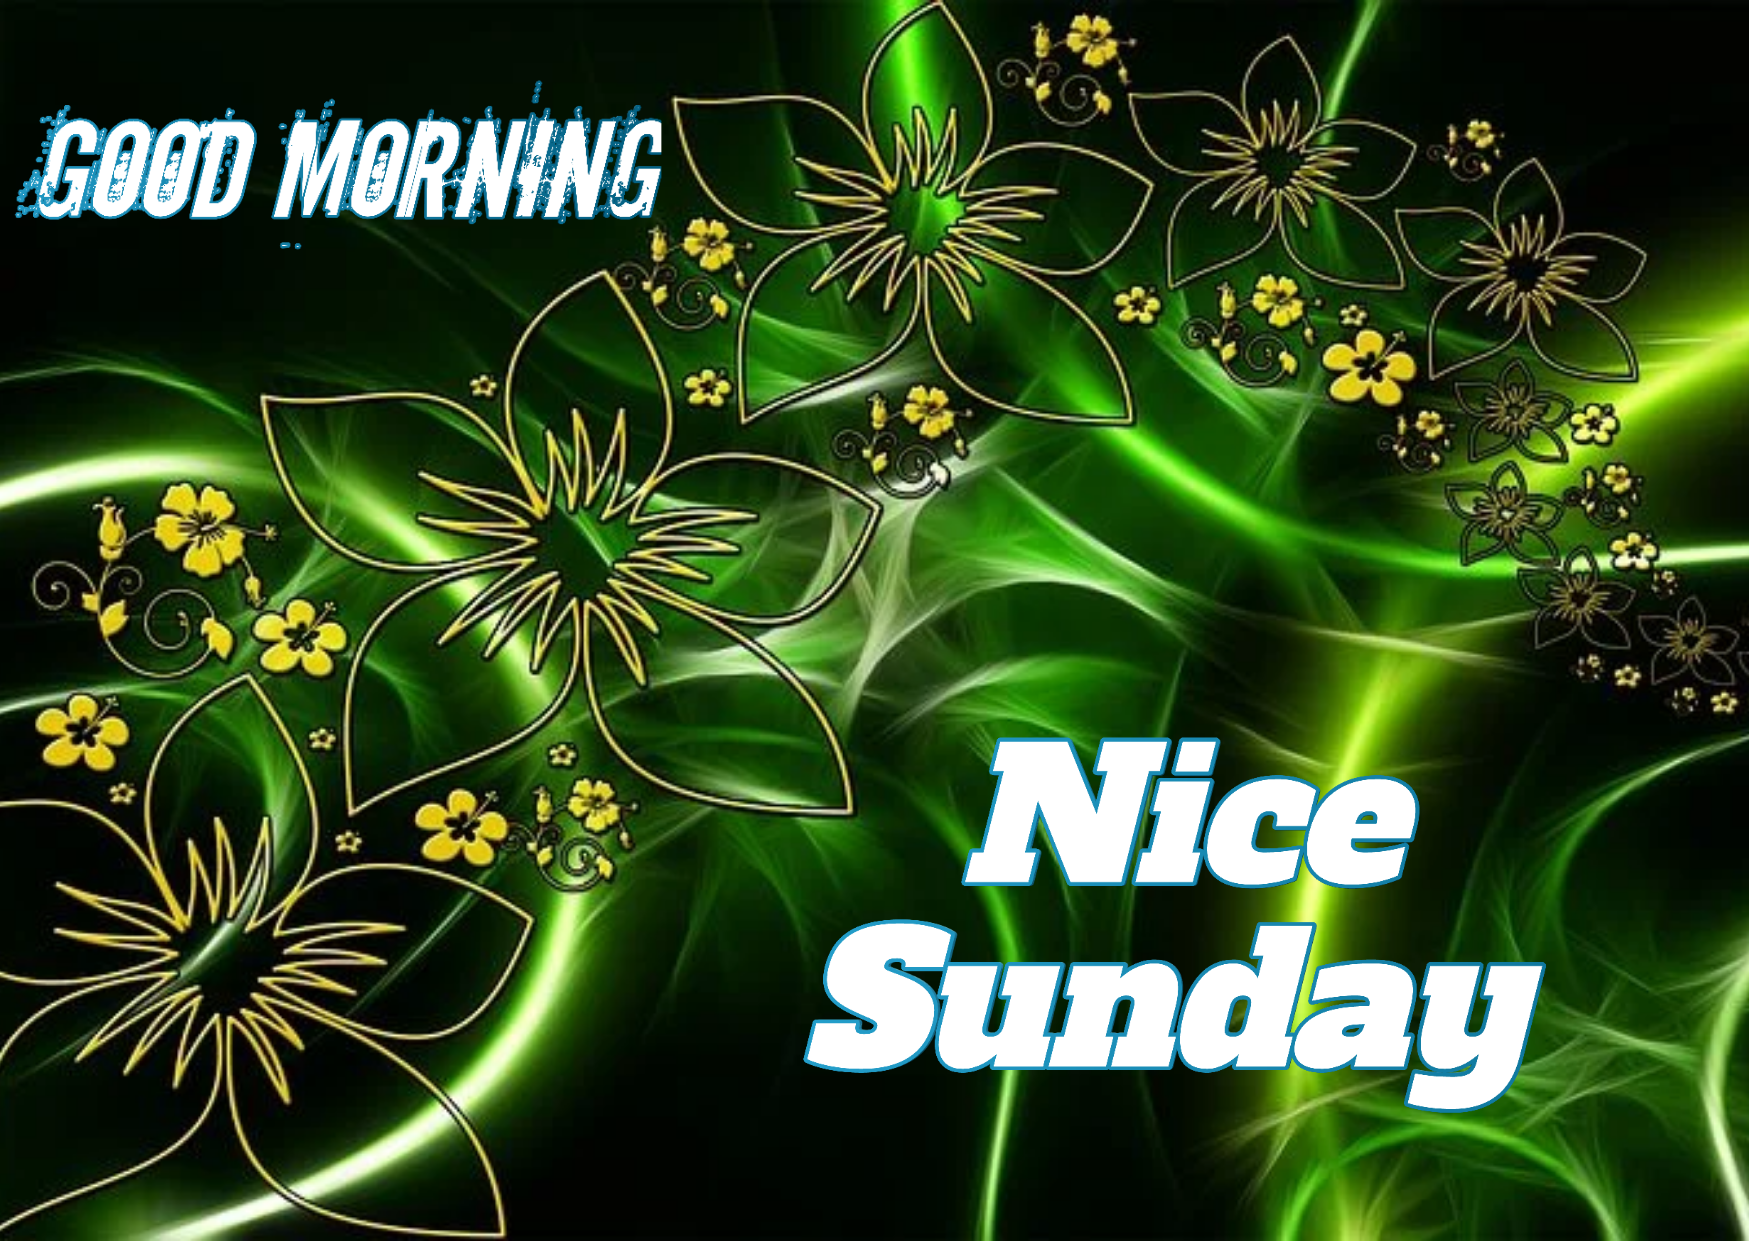 Happy Sunday  Wishes, Images, Wallpaper, Quotes, For Whatsapp, Free download,